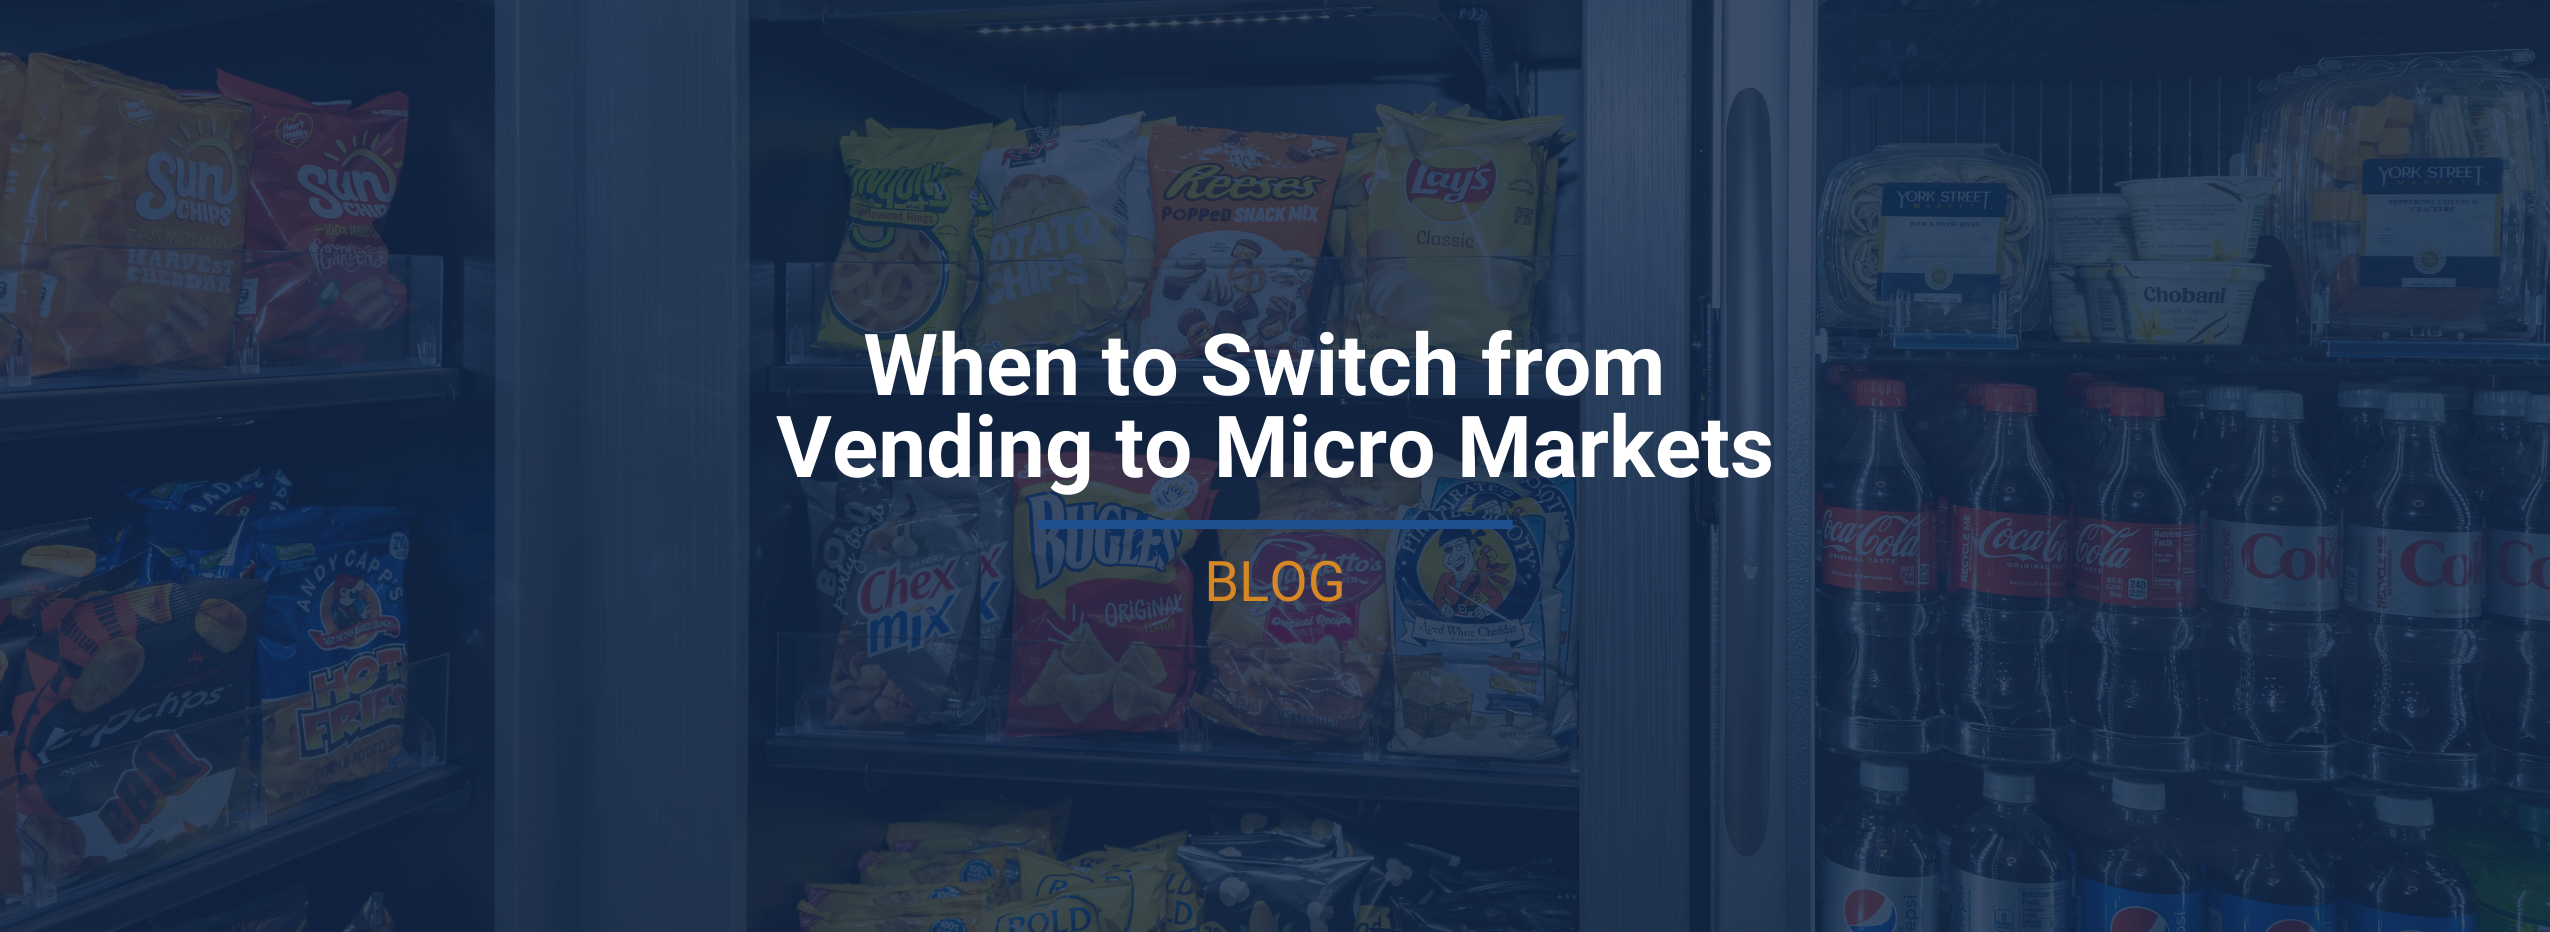 When to Switch from Vending to Micro Markets